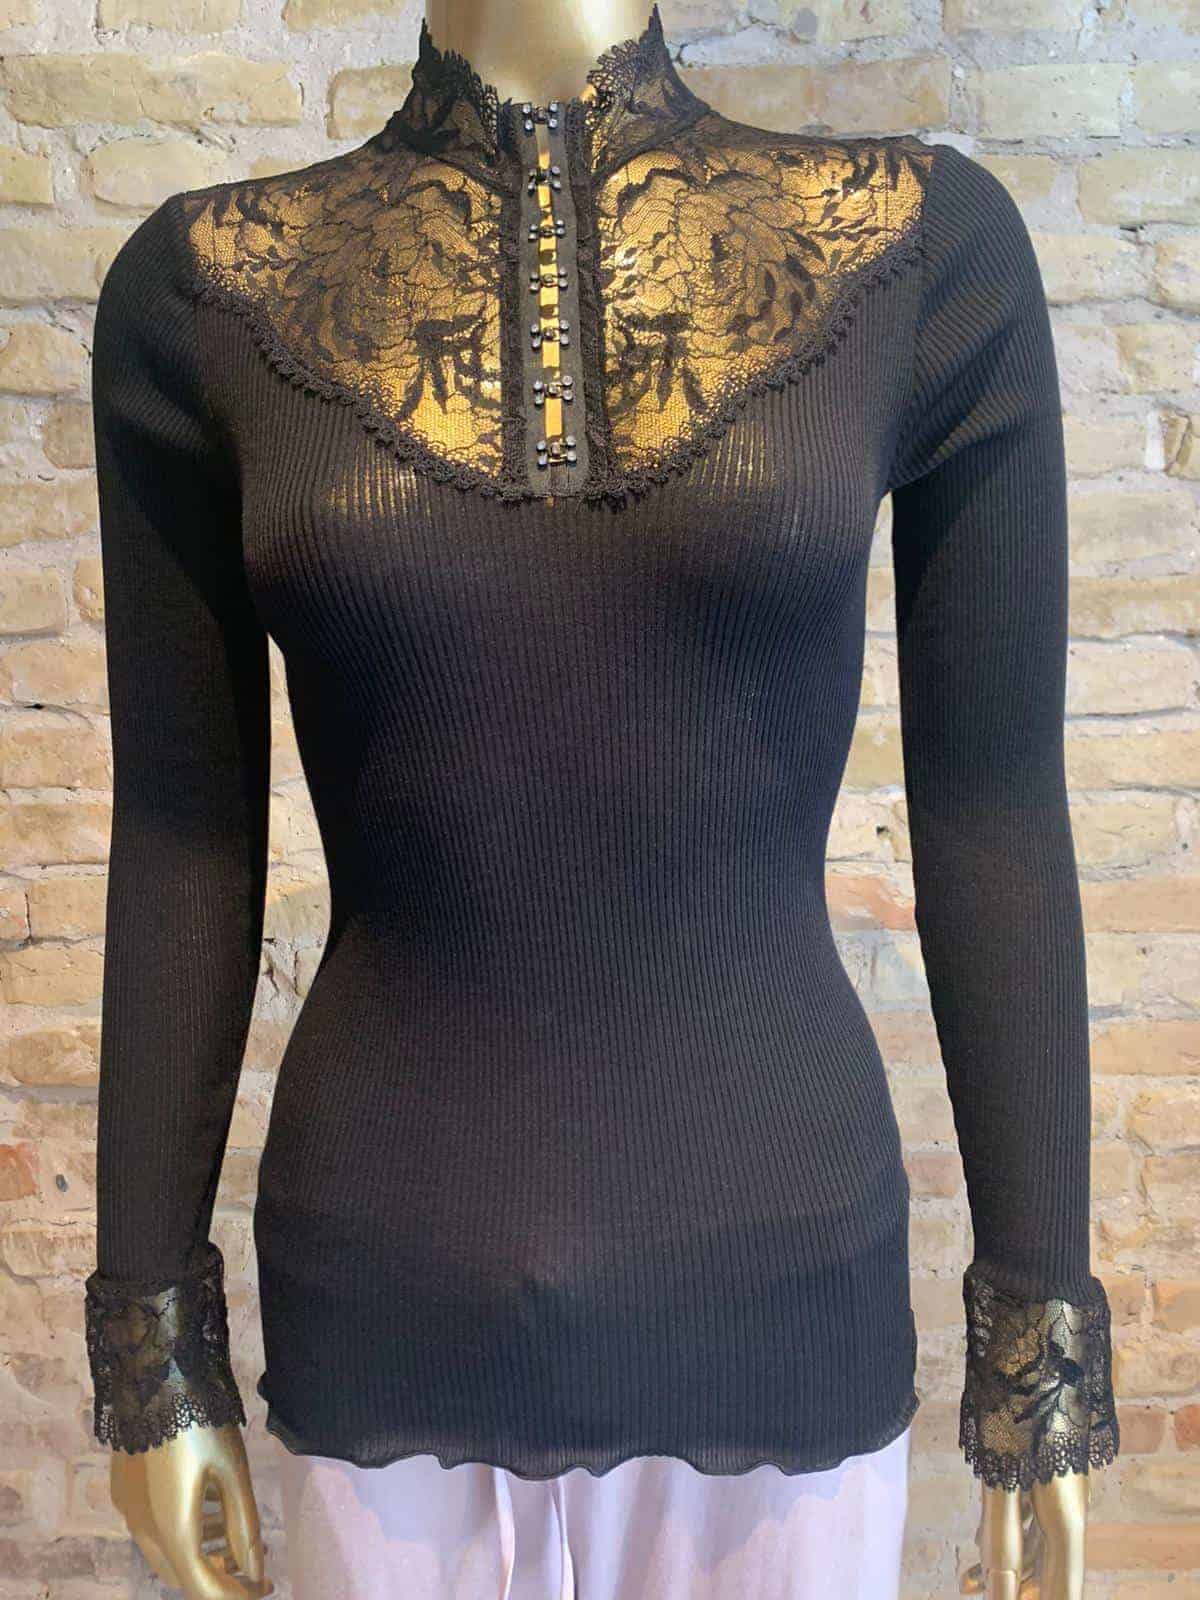 Oscalito evening lace top in black - rock vintage